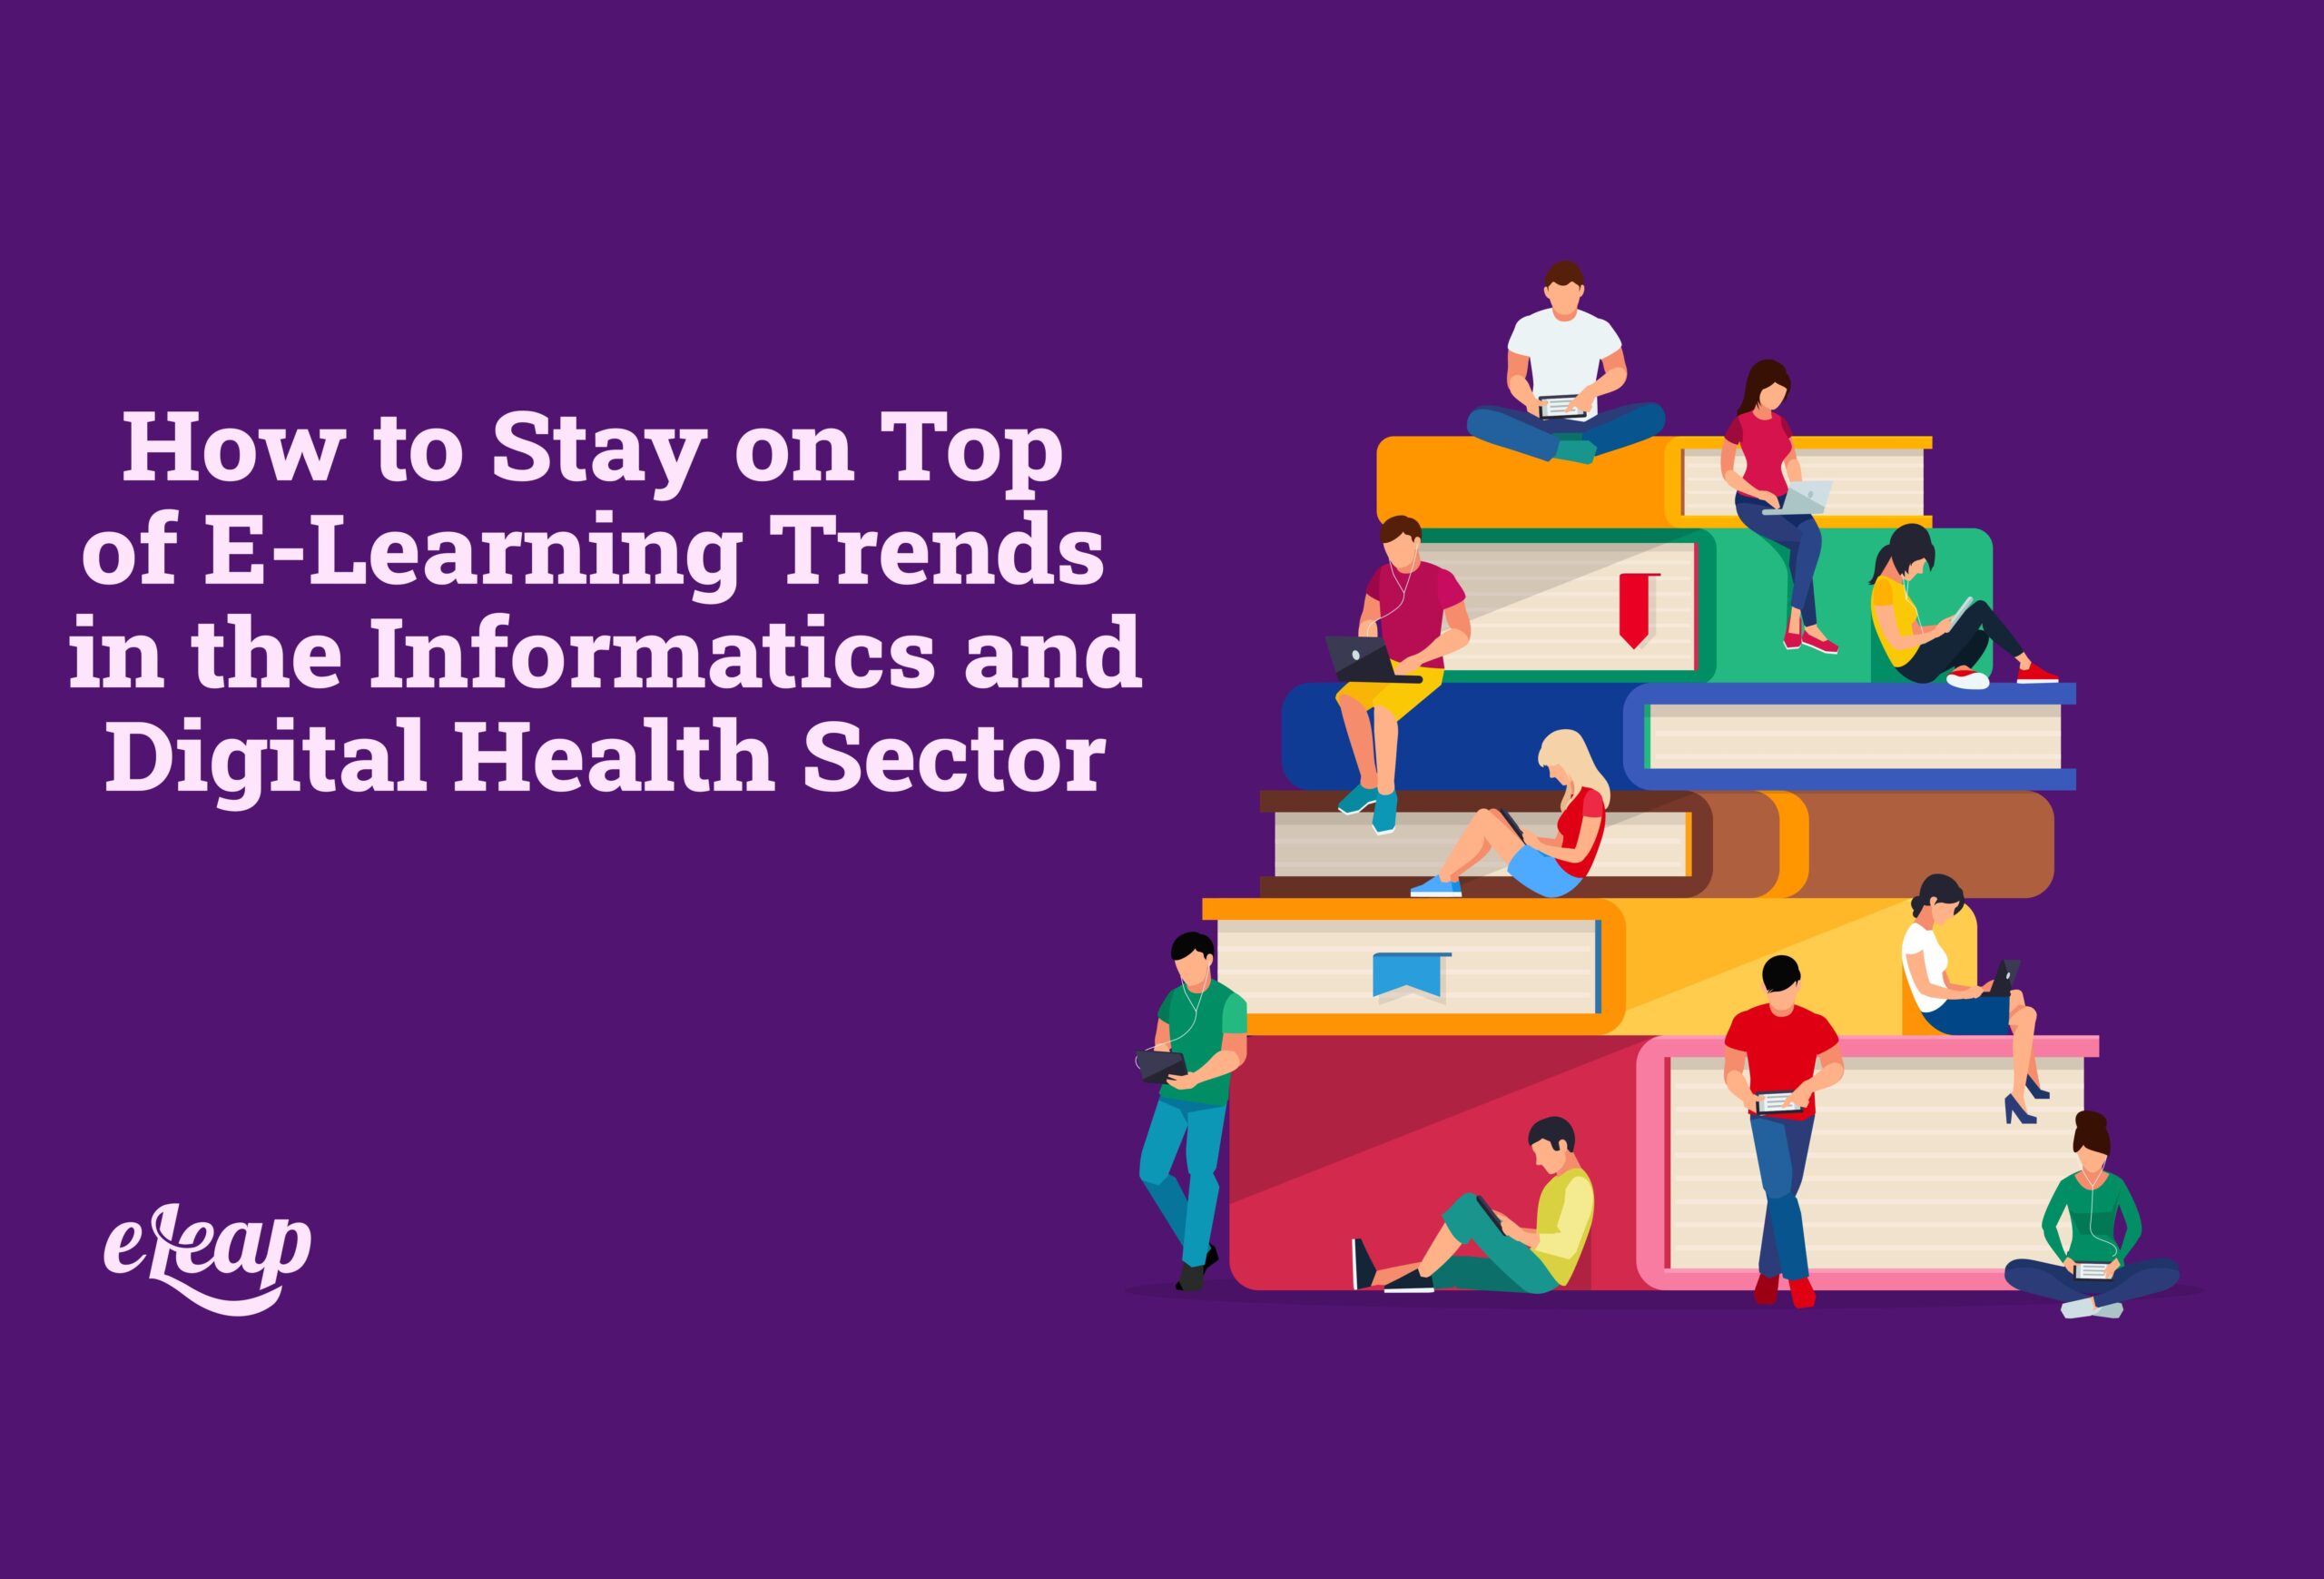 How to Stay on Top of E-Learning Trends in the Informatics and Digital Health Sector